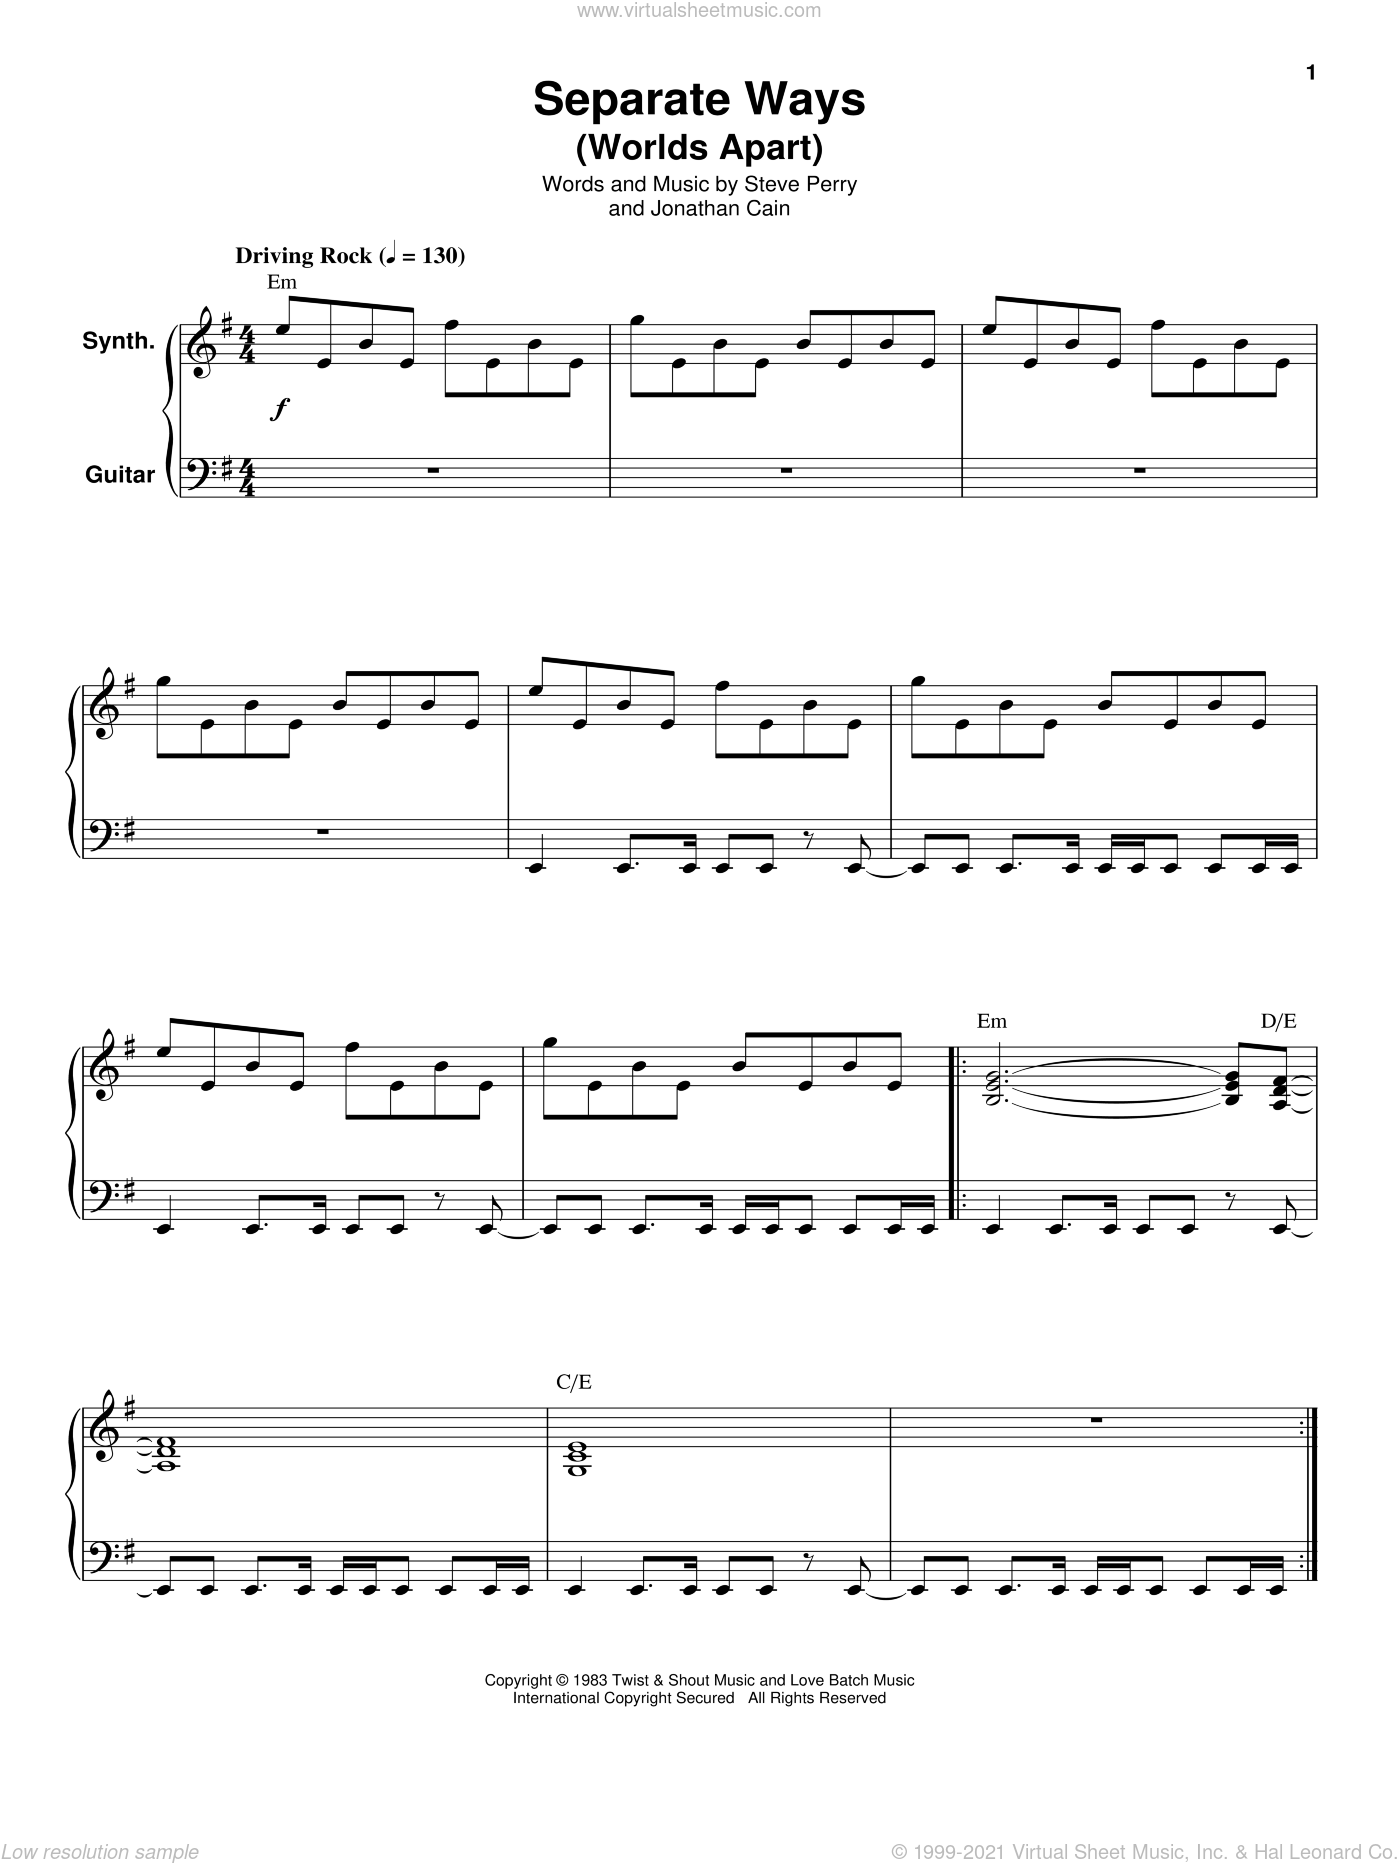 Journey: Separate Ways (Worlds Apart) for keyboard or piano, intermediate s...